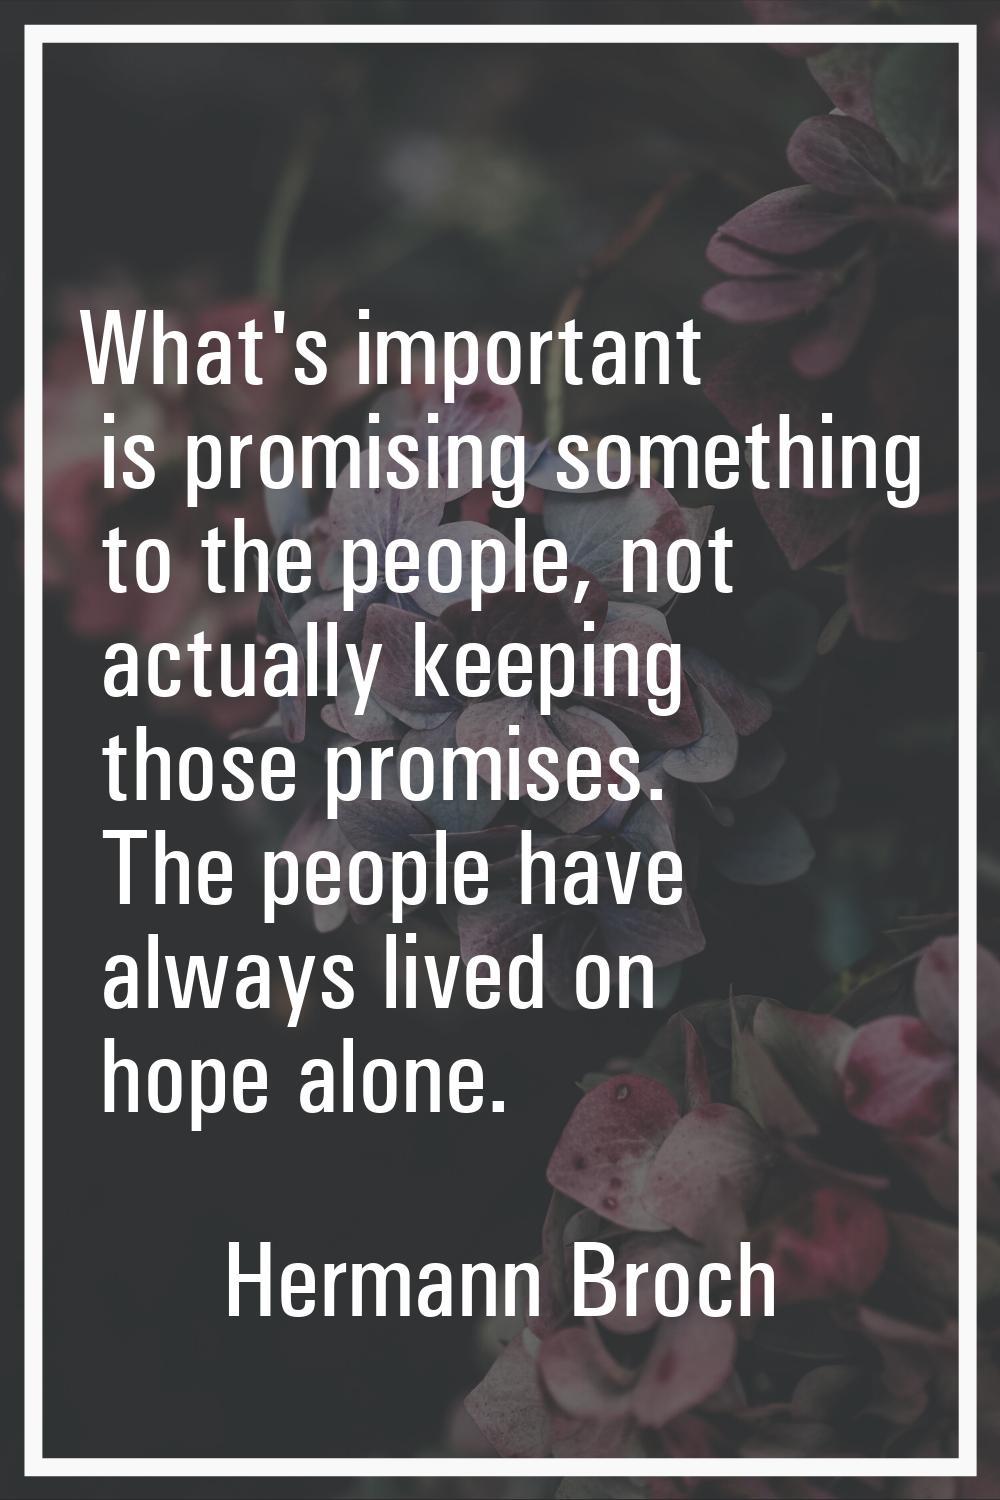 What's important is promising something to the people, not actually keeping those promises. The peo